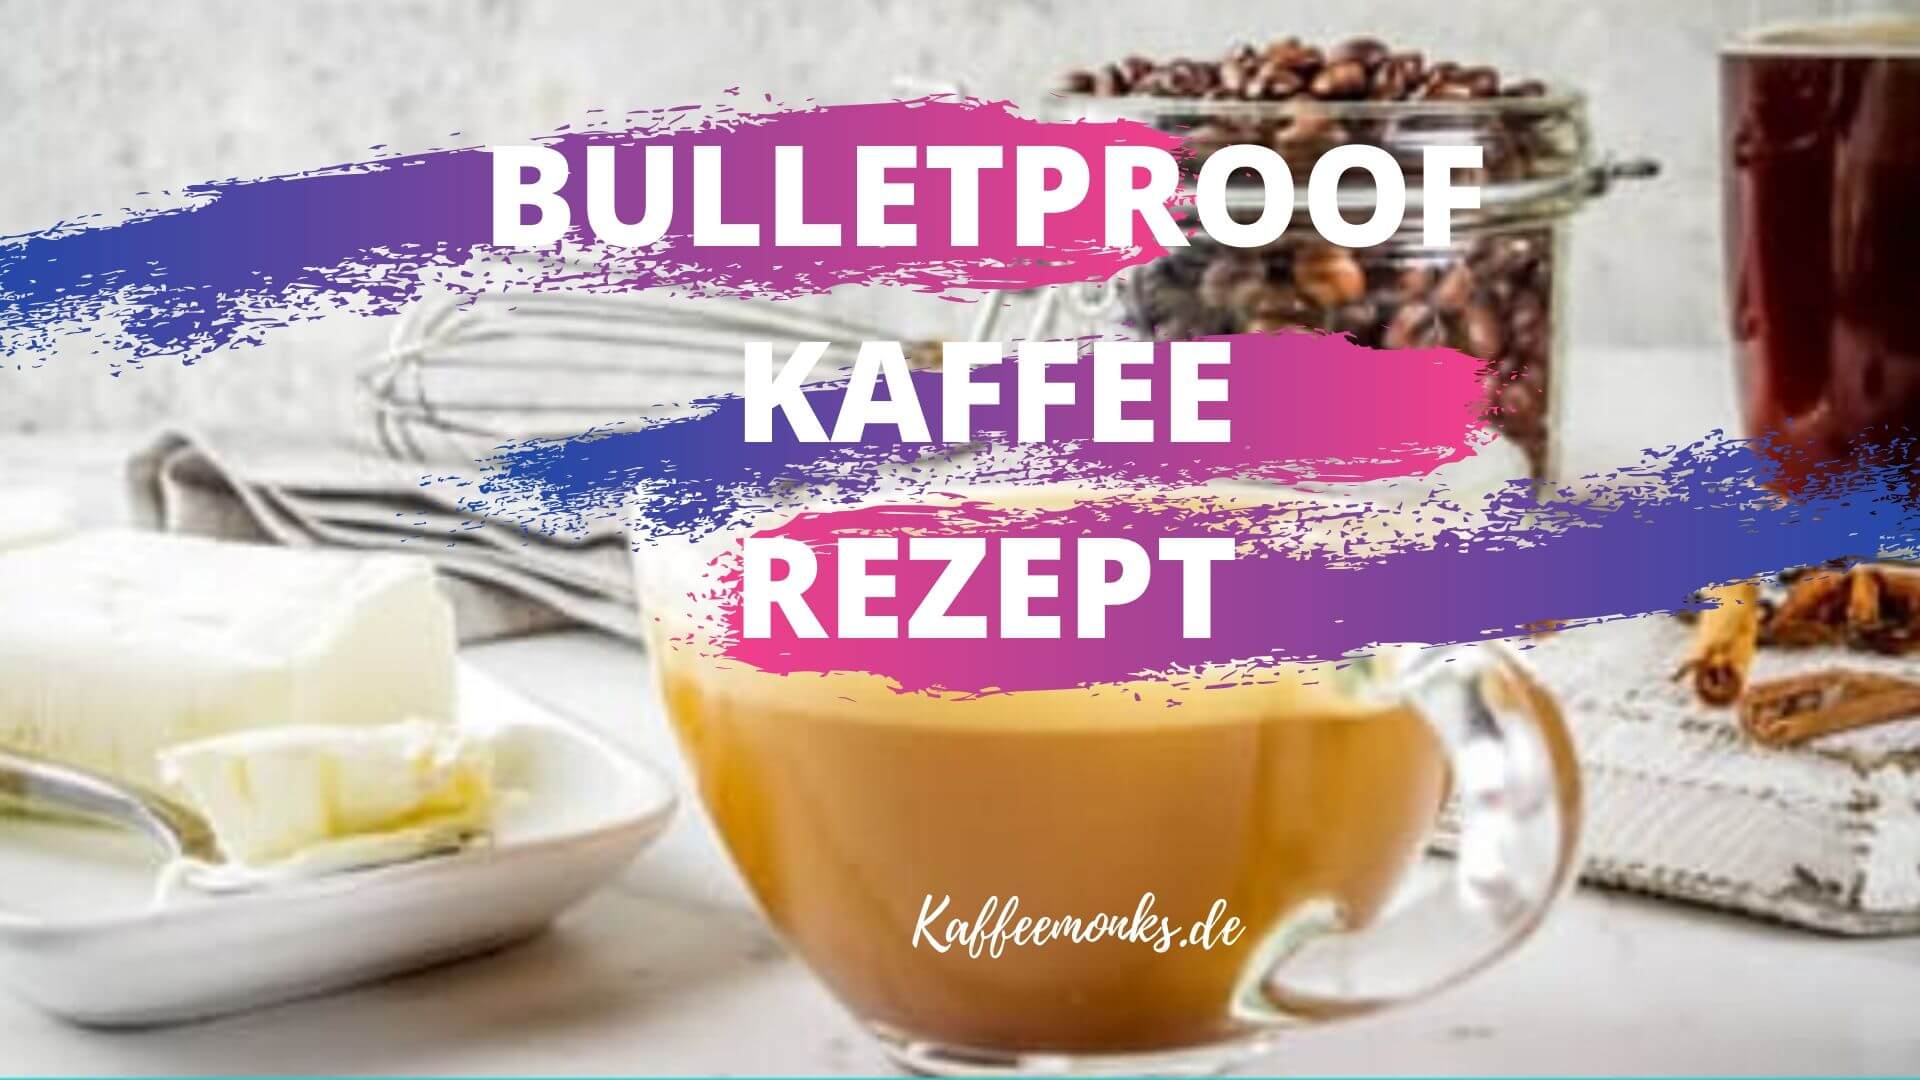 You are currently viewing BULLETPROOF KAFFEE